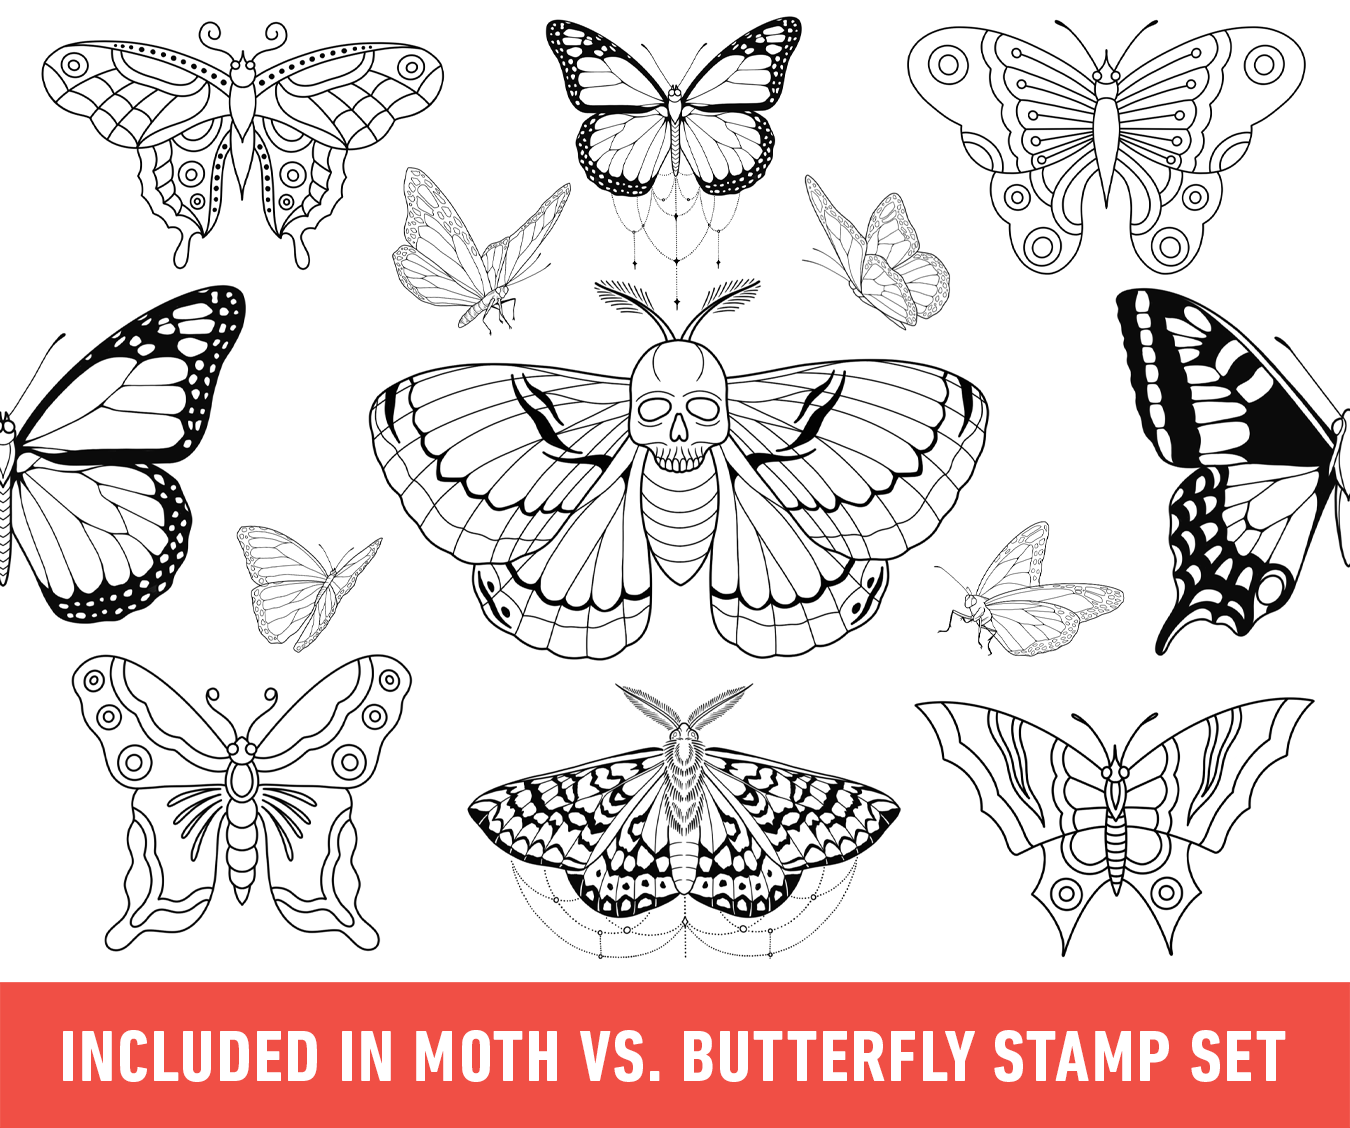 Flash Stamps - Moth vs. Butterfly - Tattoo Smart